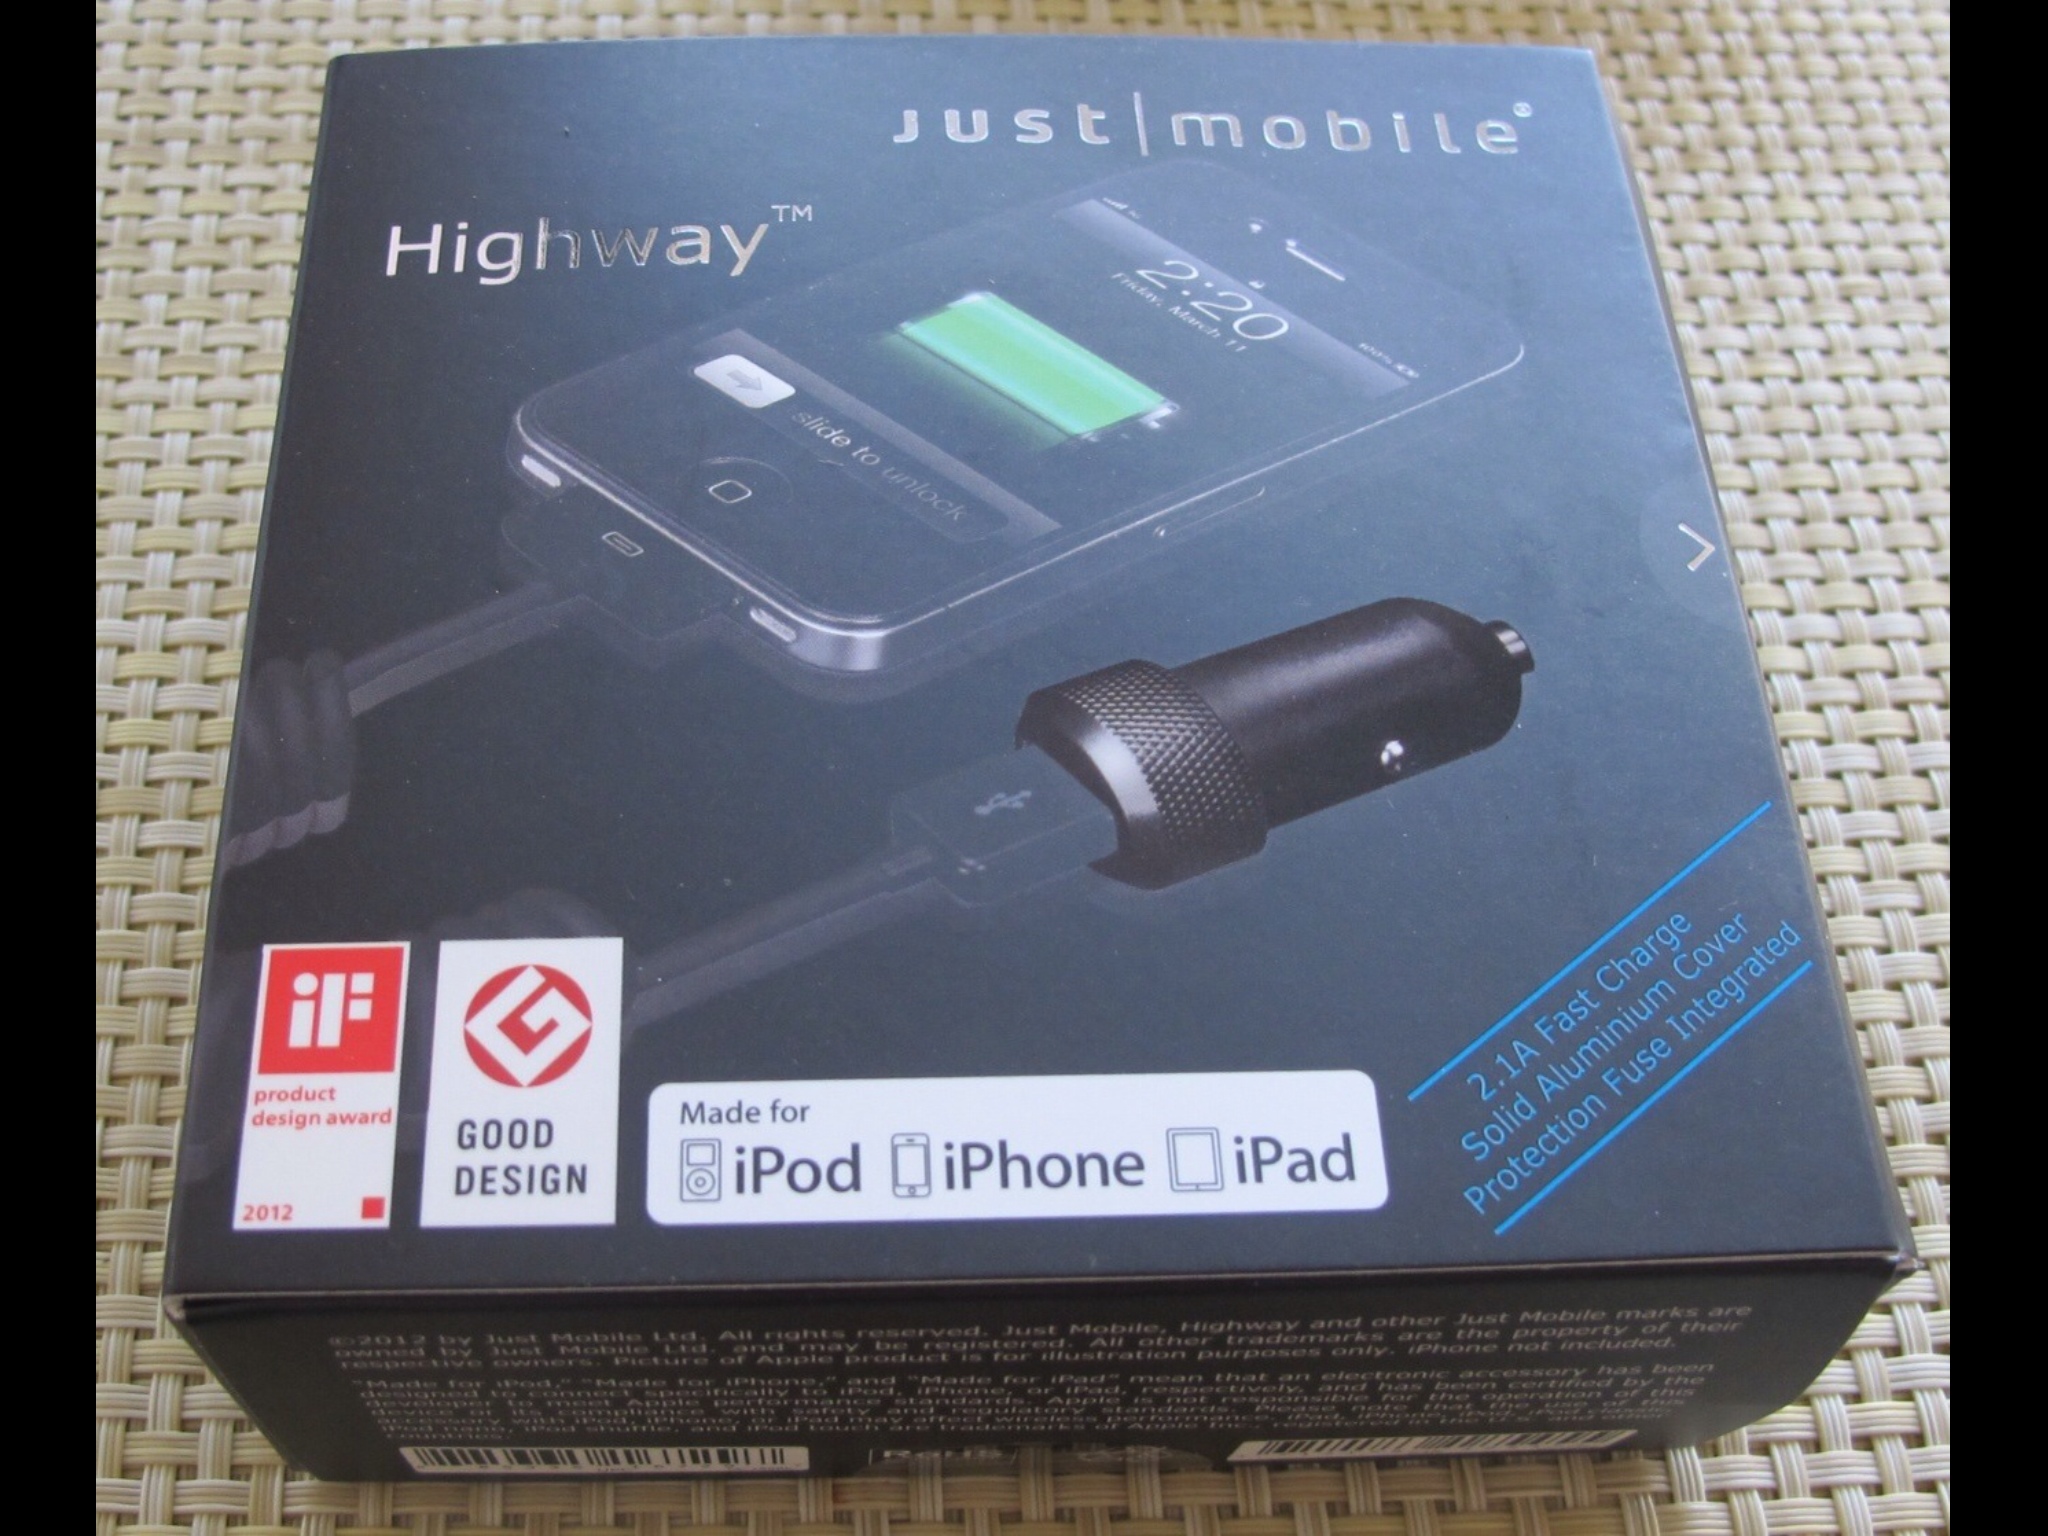 Just Mobile Highway Car Adapter for iPad and iPhone review